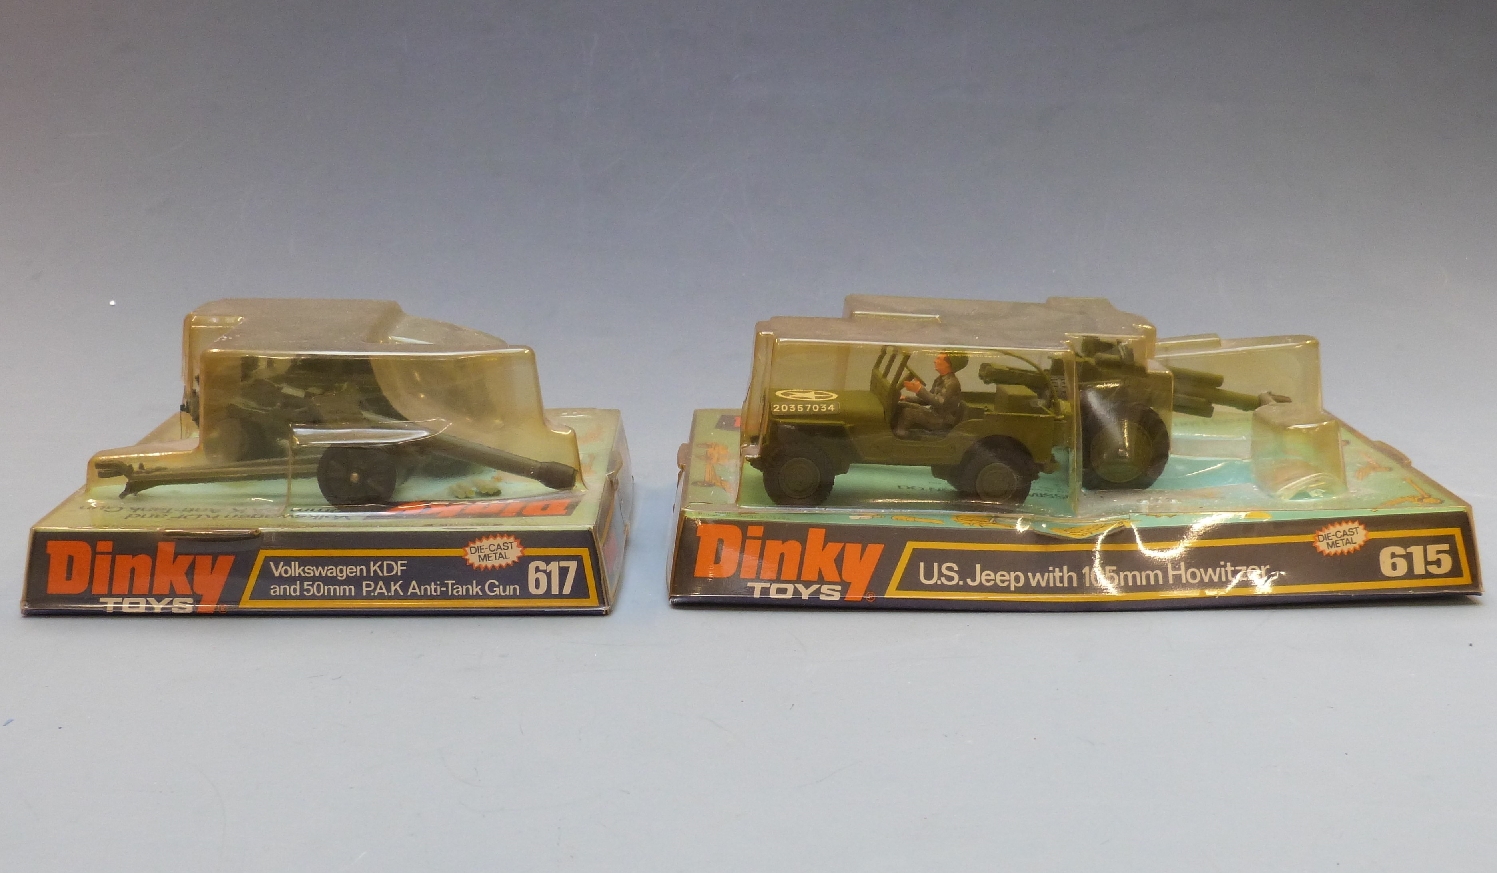 Two Dinky Toys diecast model military vehicles US Jeep with 105mm Howitzer 615 and Volkswagen KDF